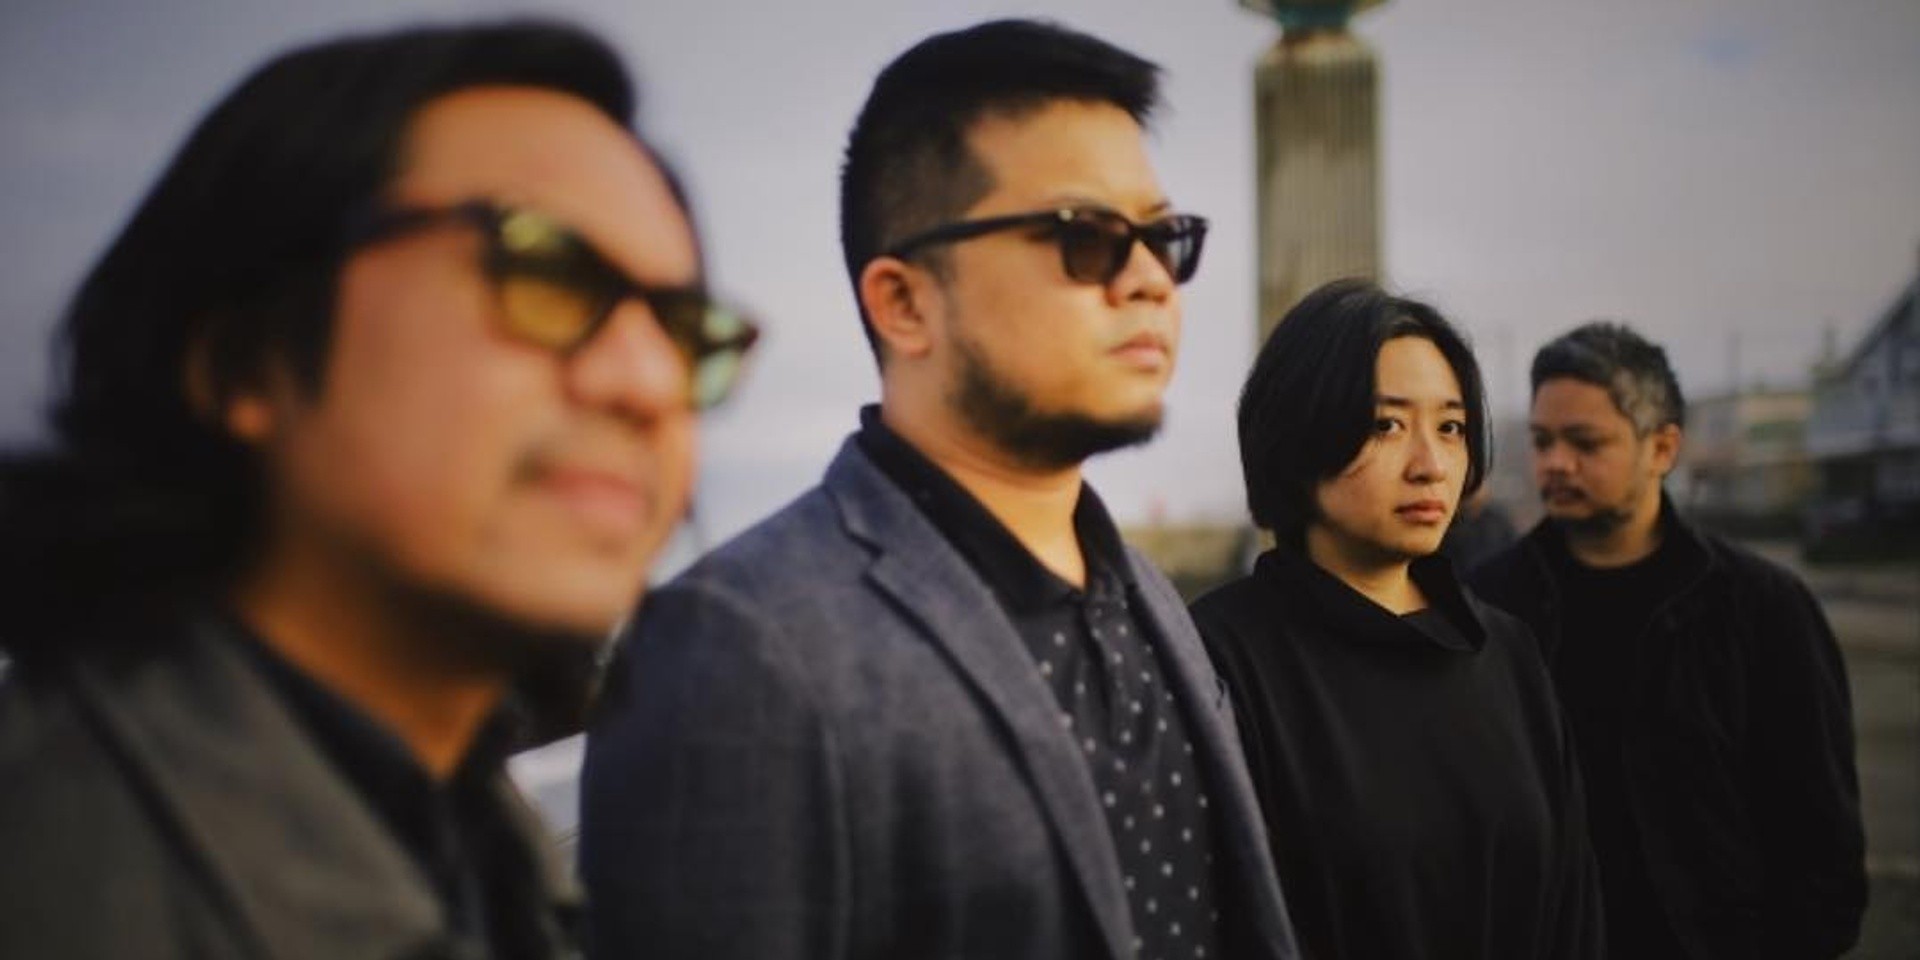 UDD welcome 2019 with new releases 'Anino,' 'Stolen,' 'Crying Season' – listen